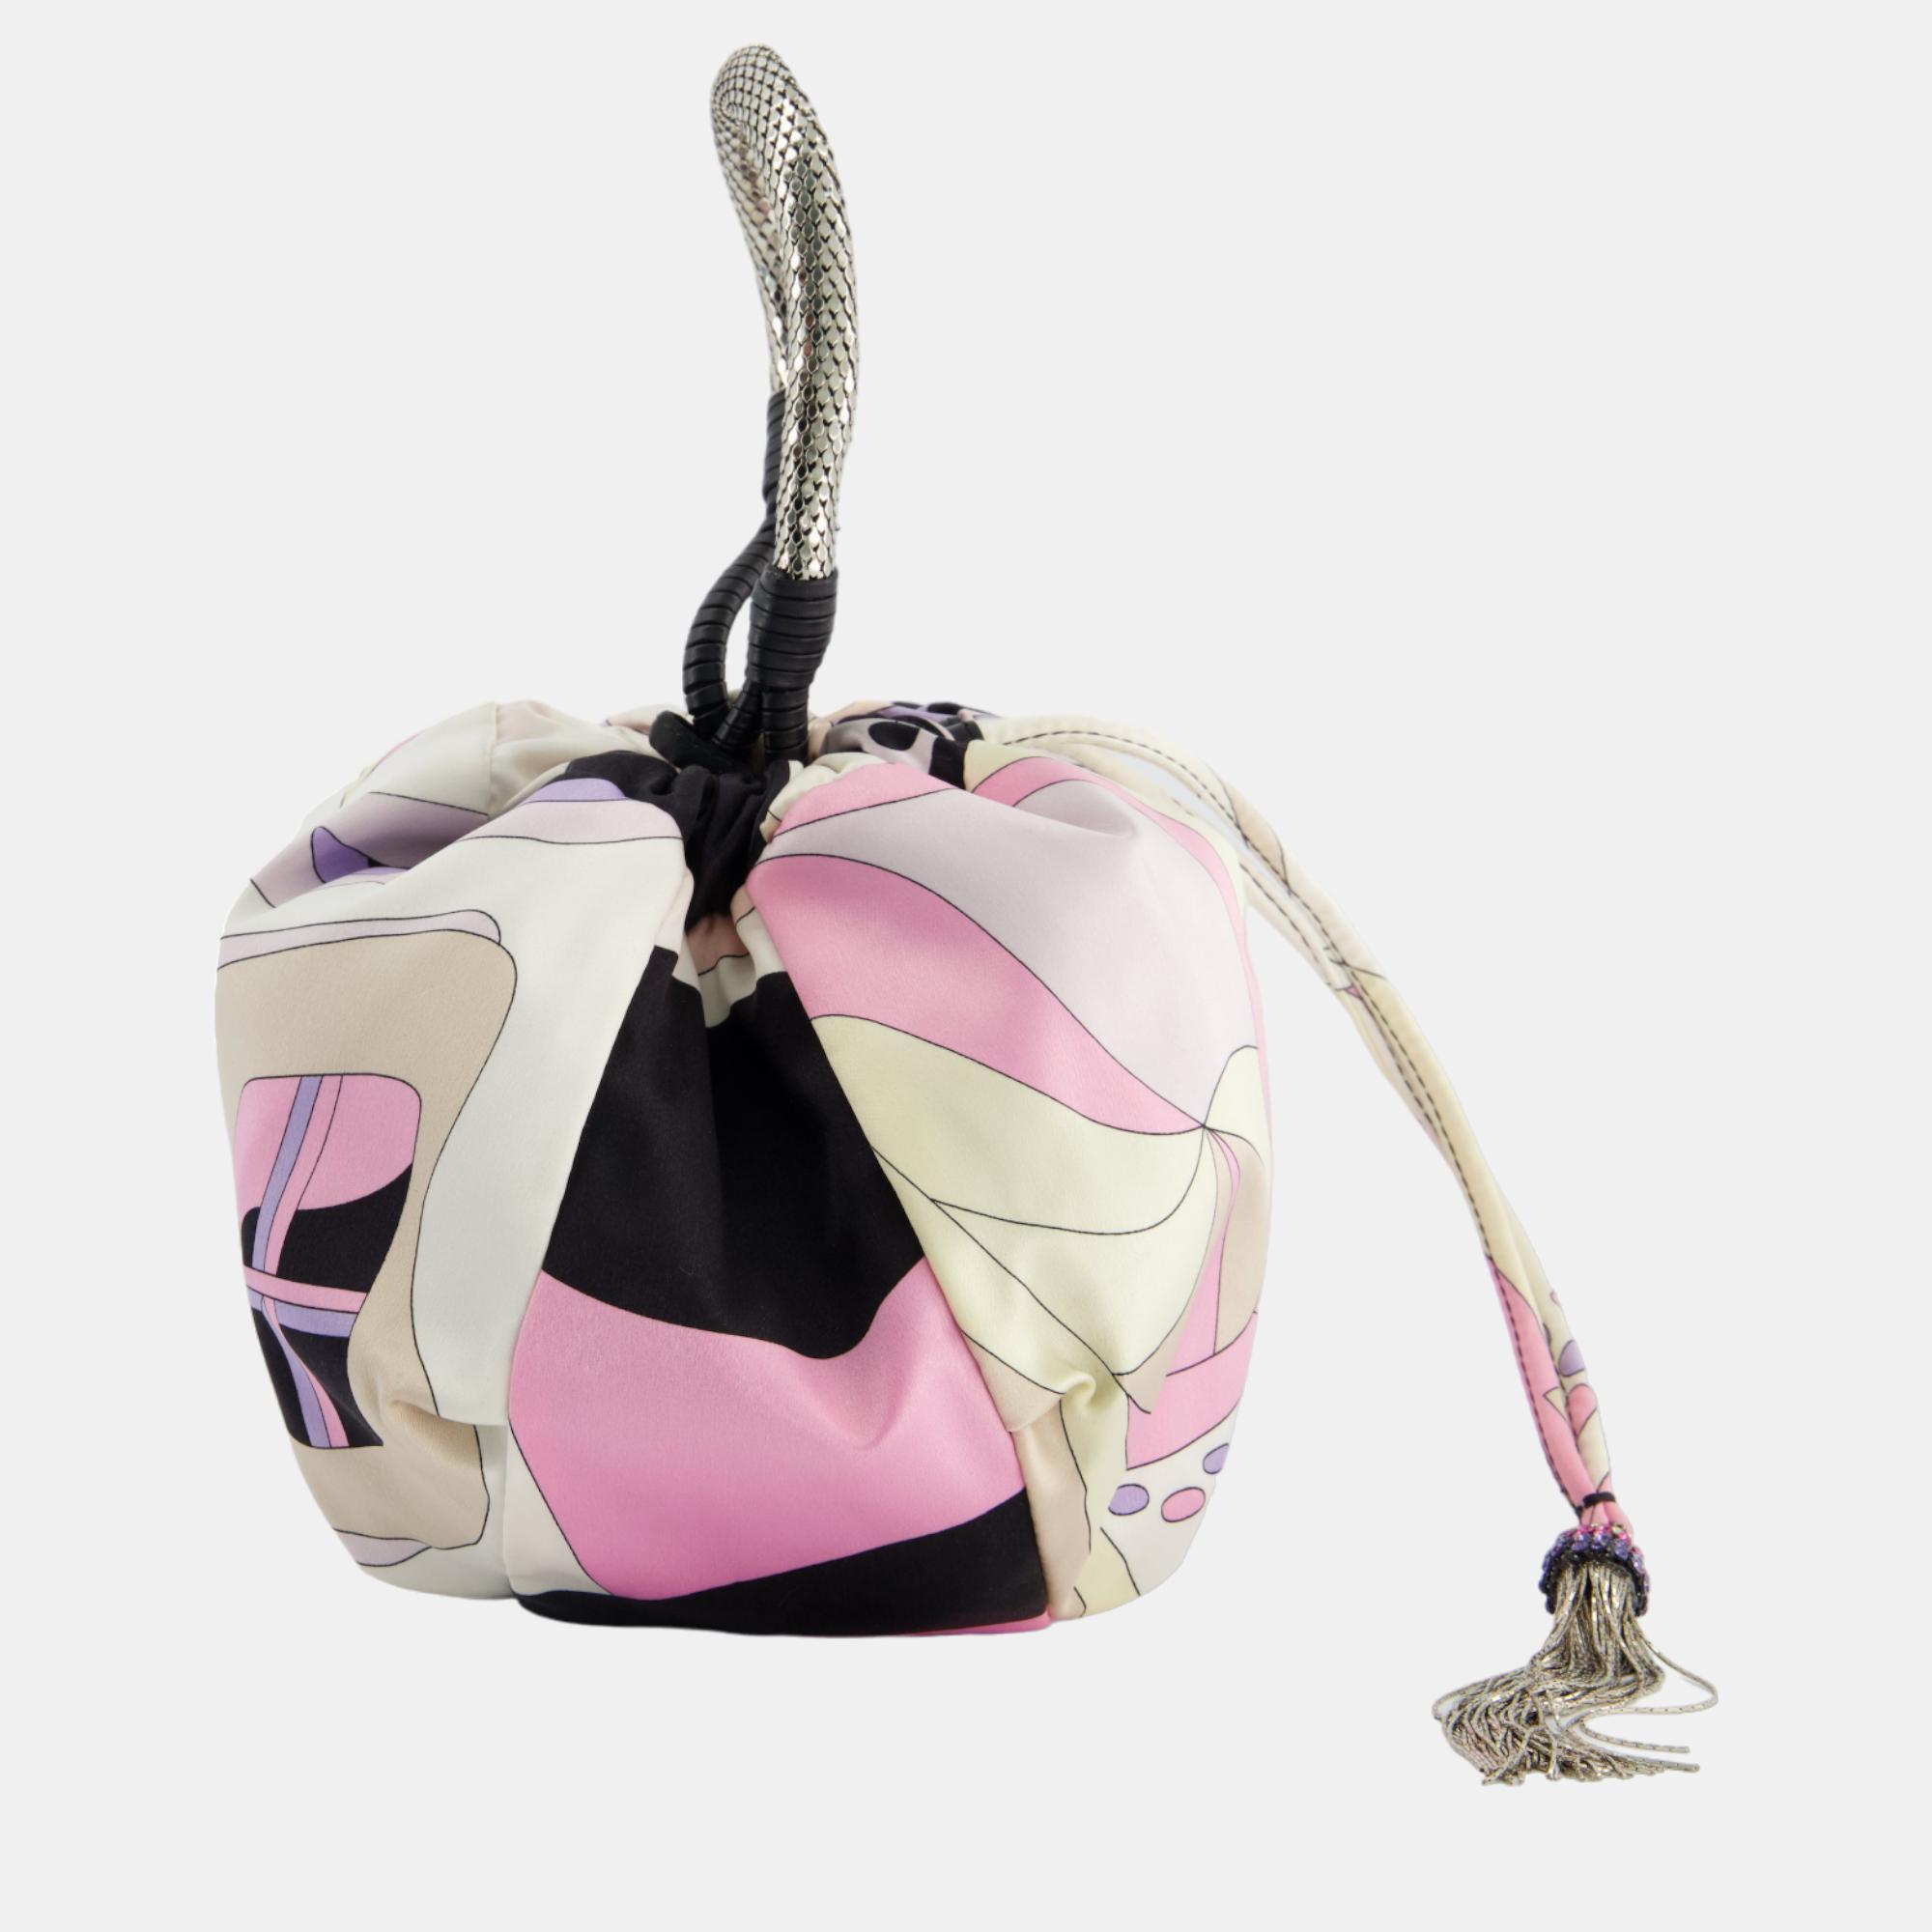 Emilio Pucci Pink Satin Pouch Tassel Bag With Chain Mail Leather Handle Detail